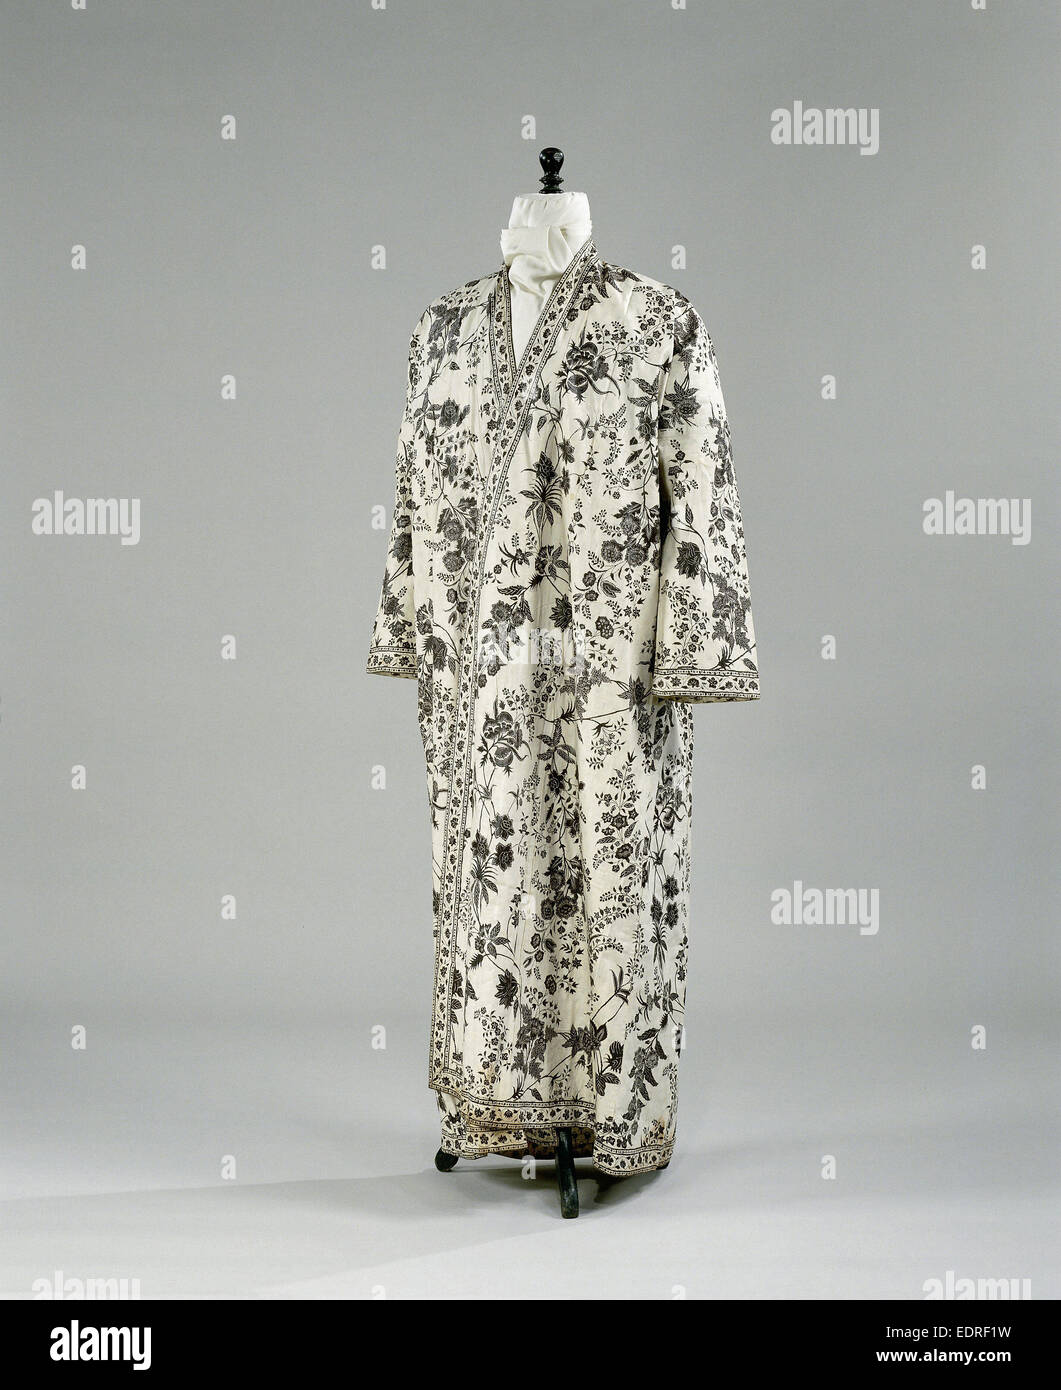 Robe of chintz with floral motif on white ground, lined with white cotton printed with a pattern of brown acorns, Anonymous Stock Photo